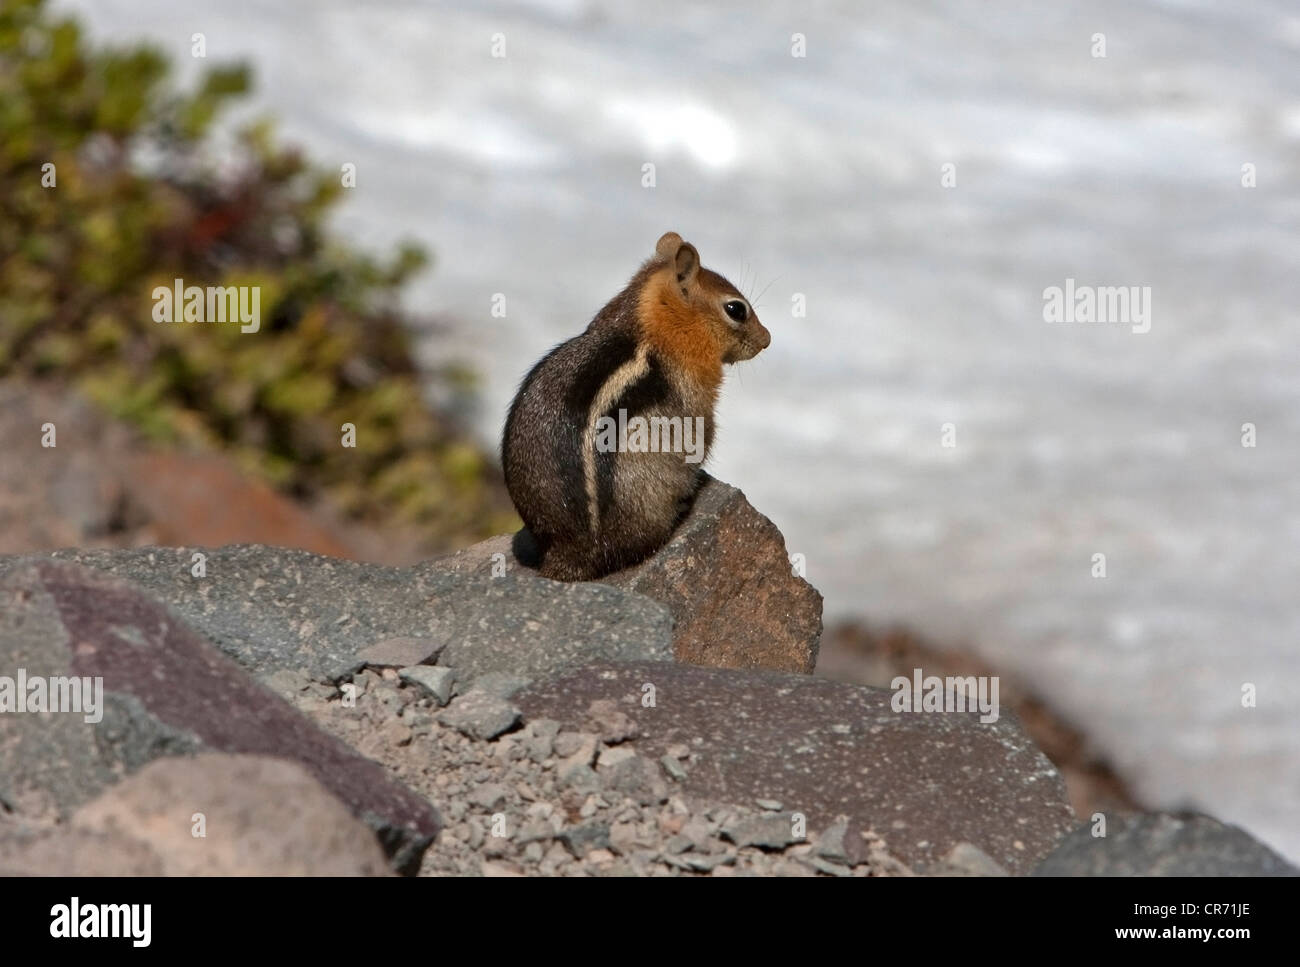 Golden-mantled ground squirrel (Callospermophilus lateral) sitting on a rock at Crater Lake, Oregon, USA in June Stock Photo